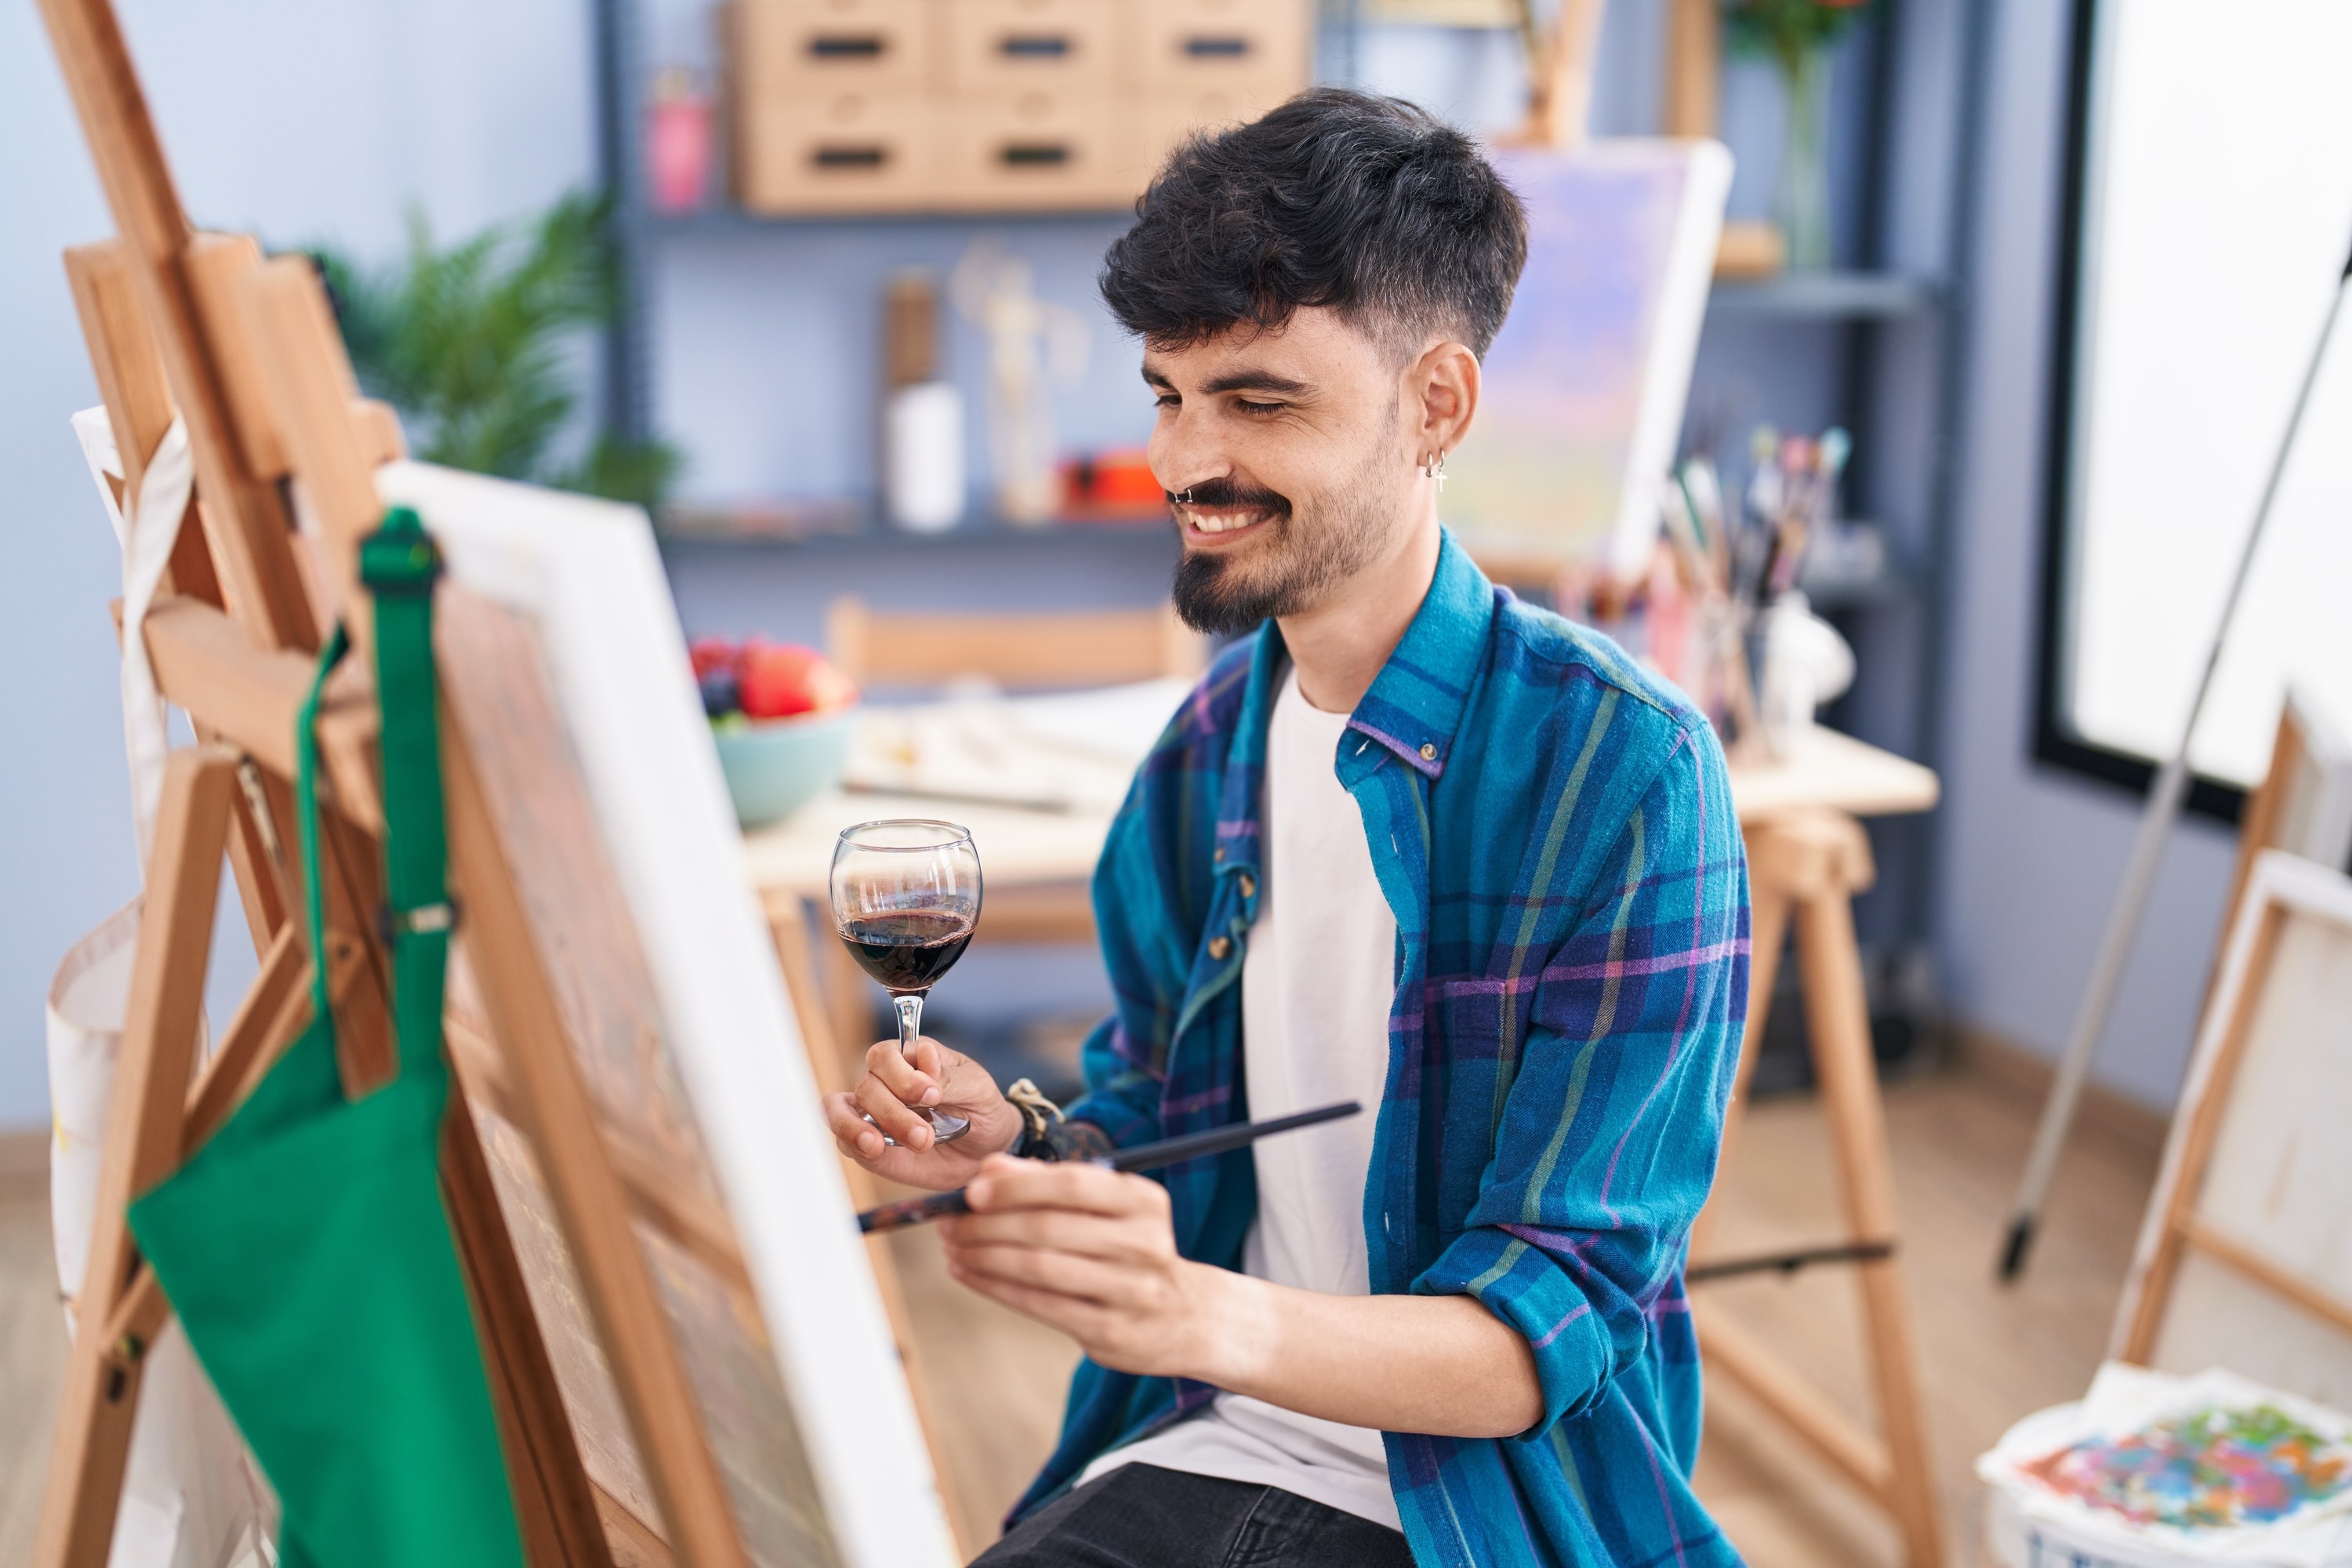 man smiling and painting while holding a glass of wine